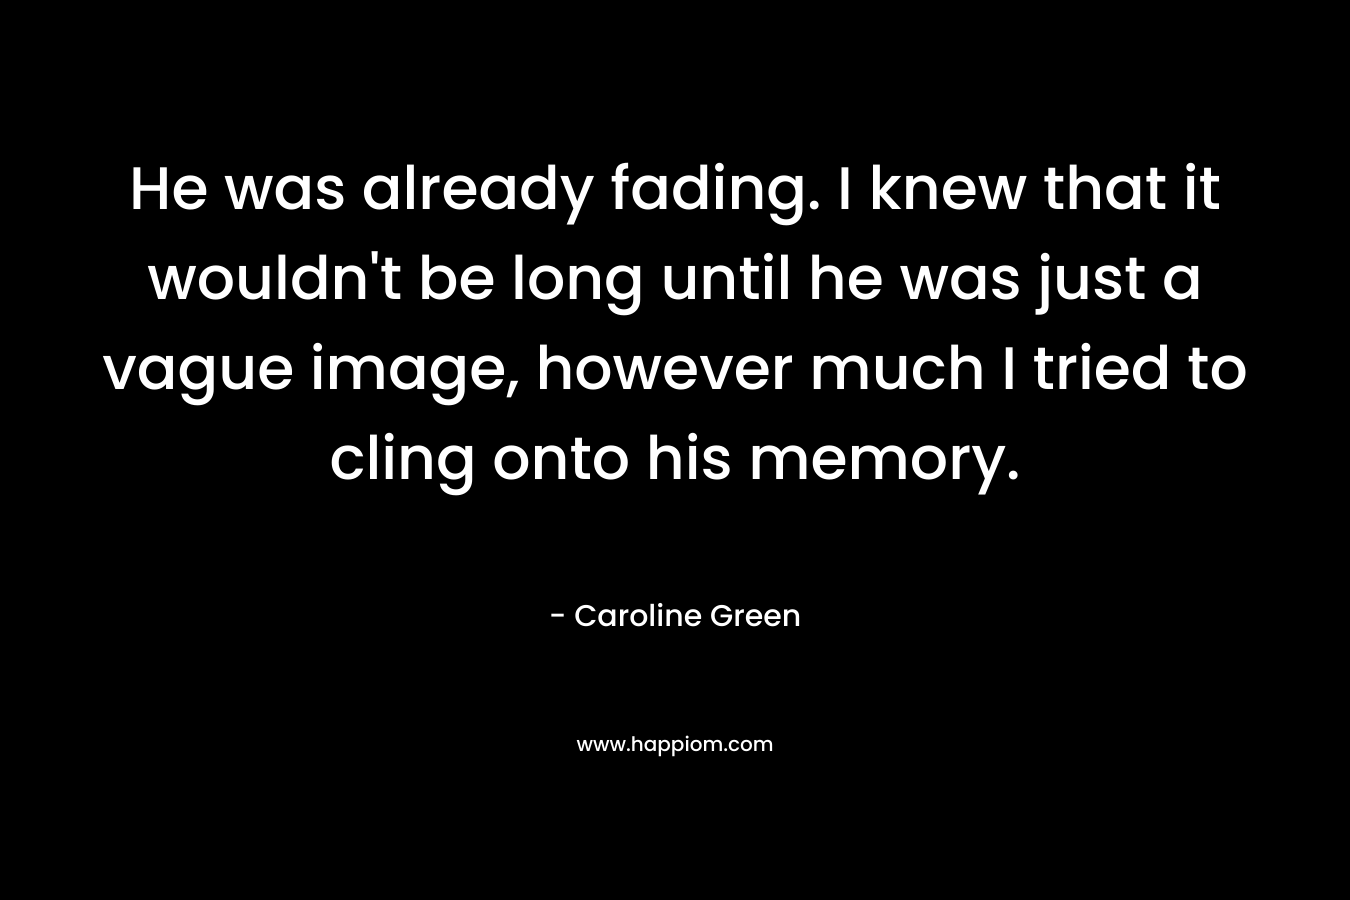 He was already fading. I knew that it wouldn’t be long until he was just a vague image, however much I tried to cling onto his memory. – Caroline Green